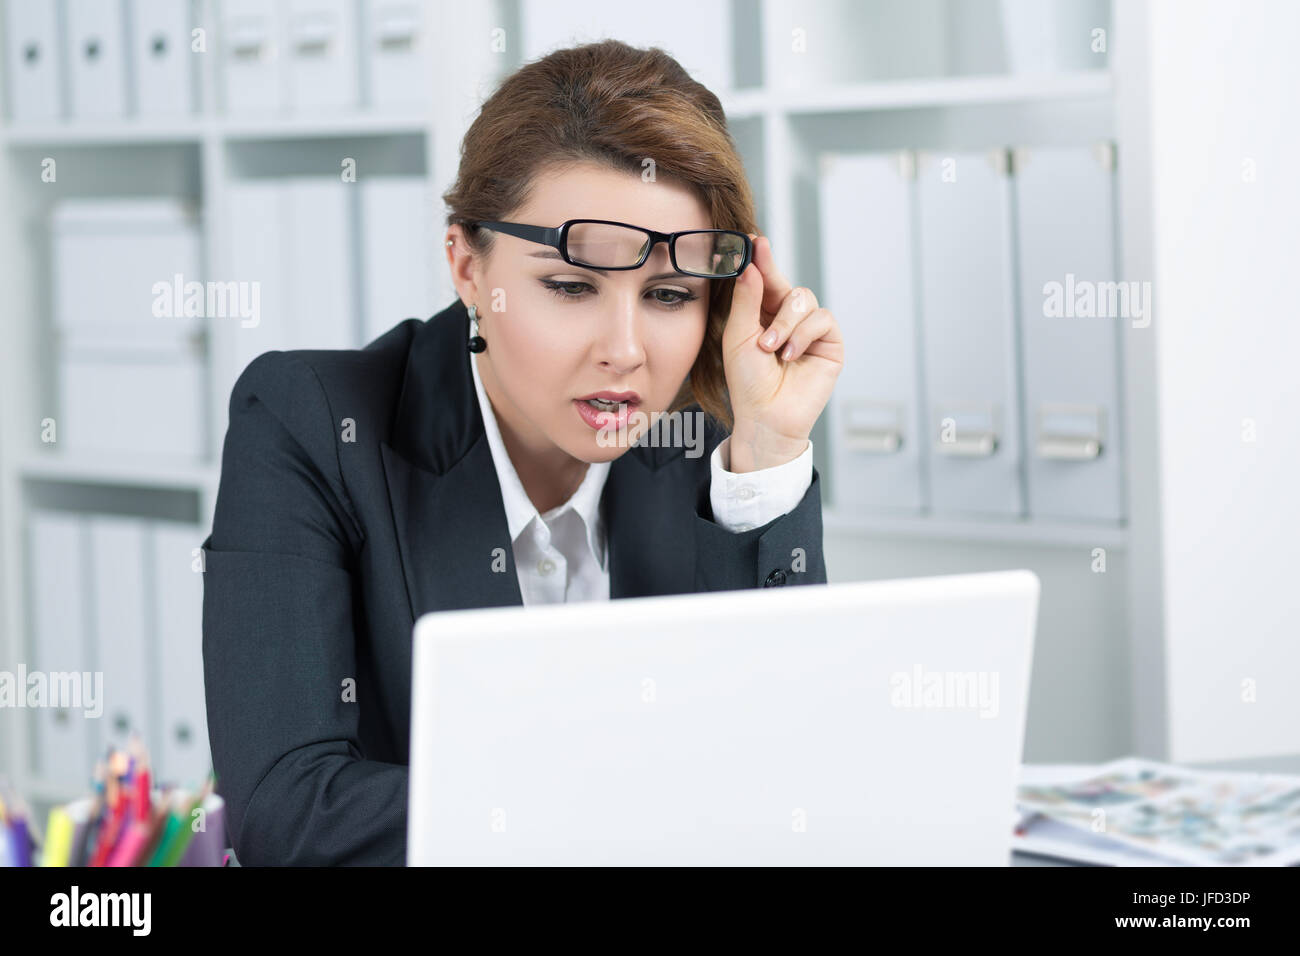 Young business woman looking intently at laptop monitor seeing something strange Stock Photo